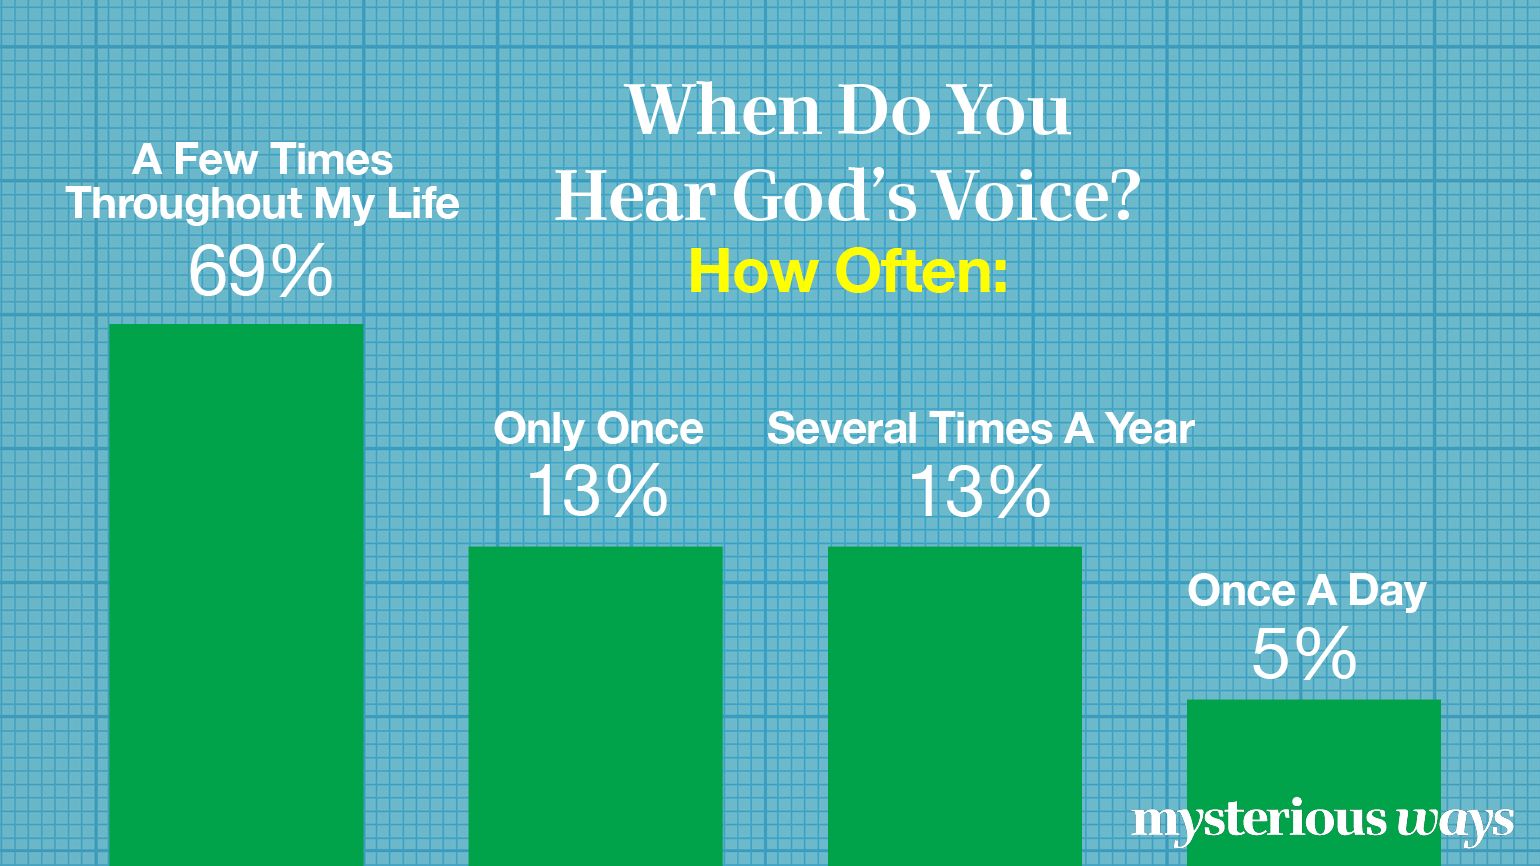 God's Voice: Where, When and How We Hear It